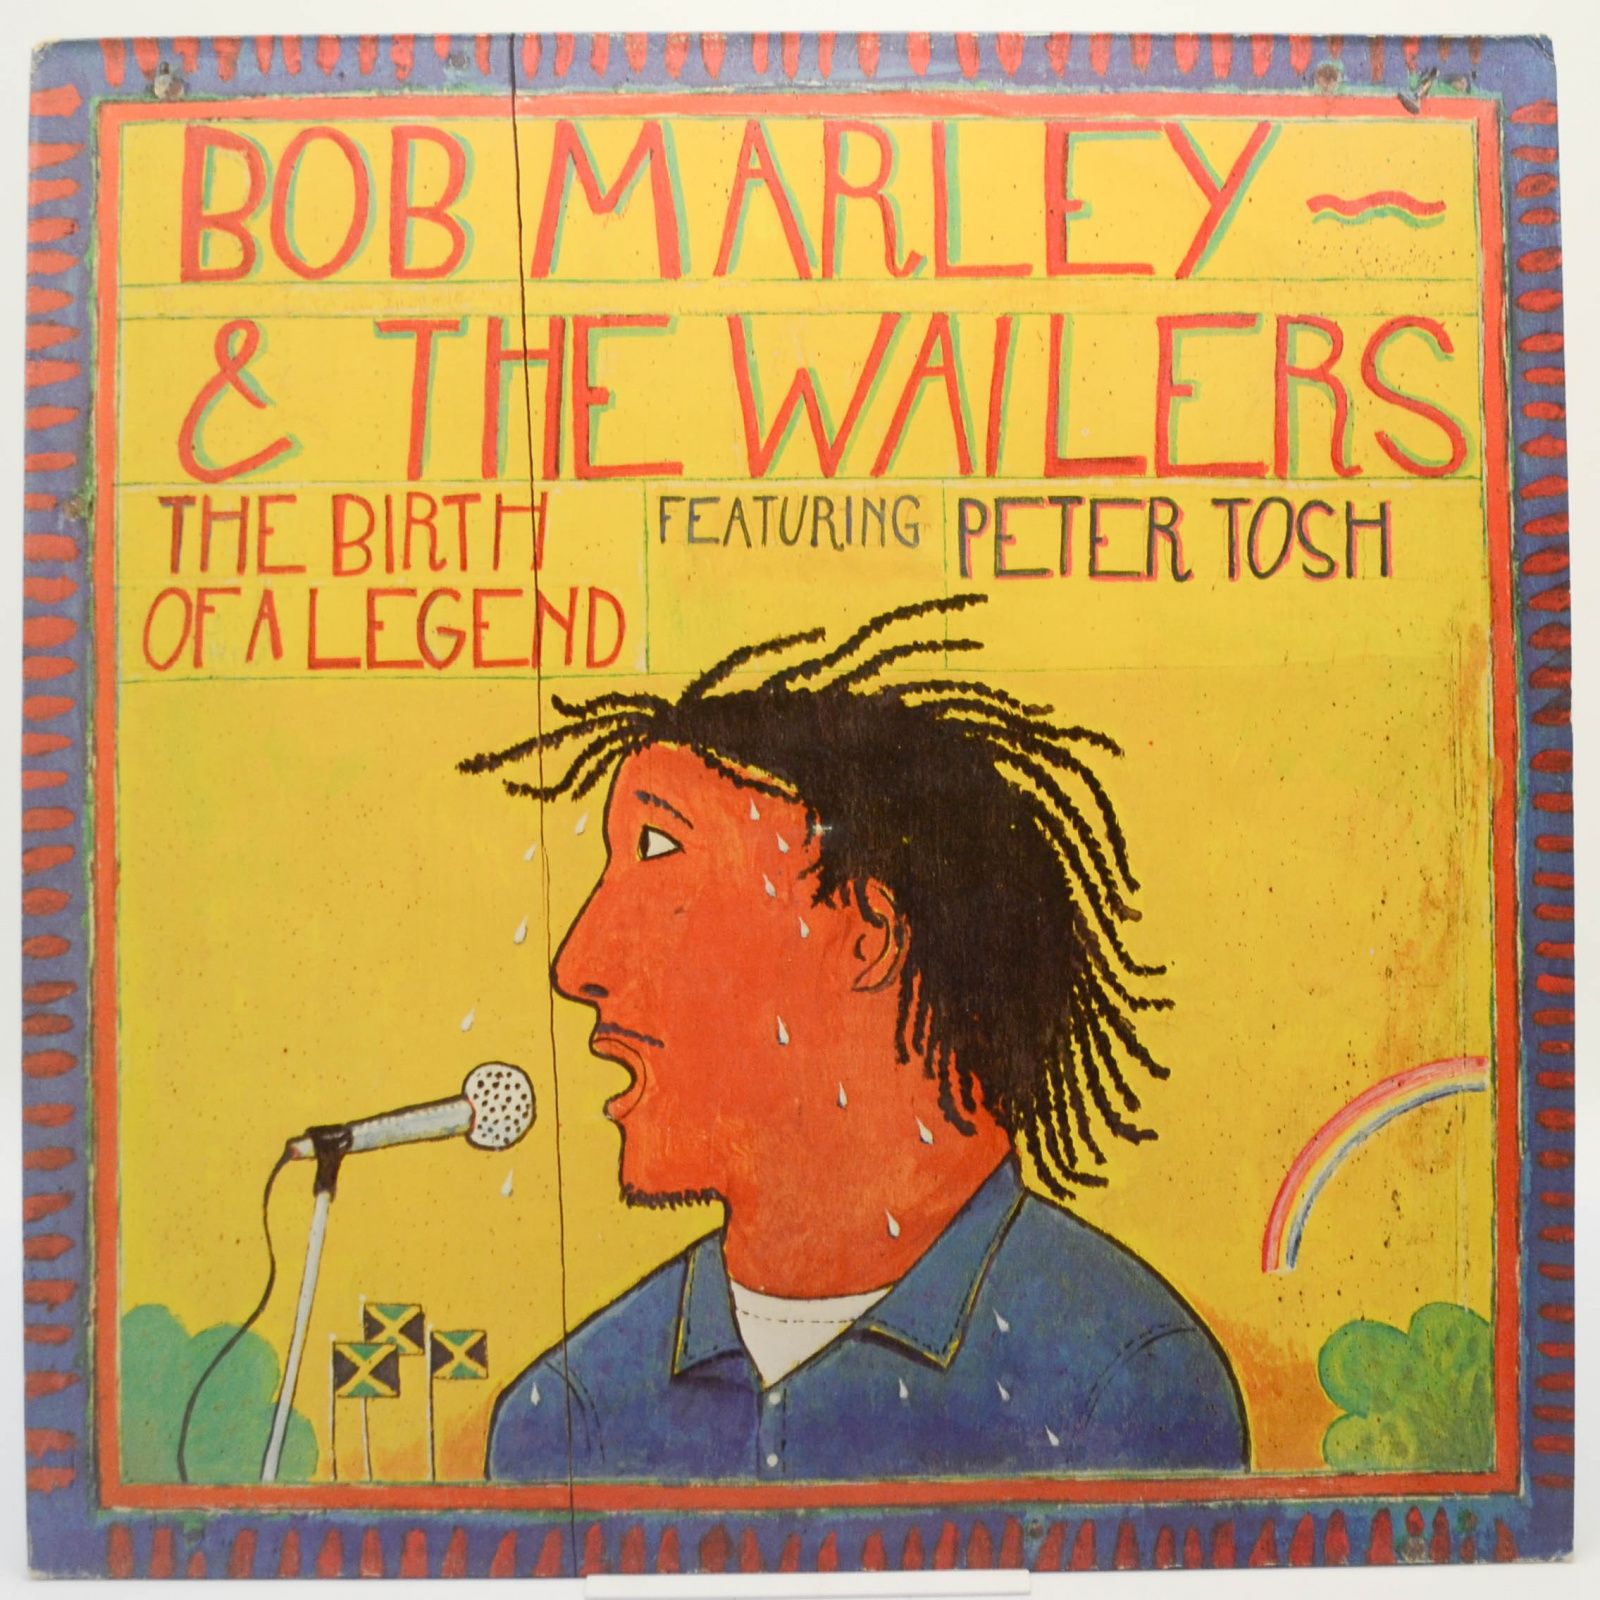 Bob Marley & The Wailers Featuring Peter Tosh — The Birth Of A Legend, 1977